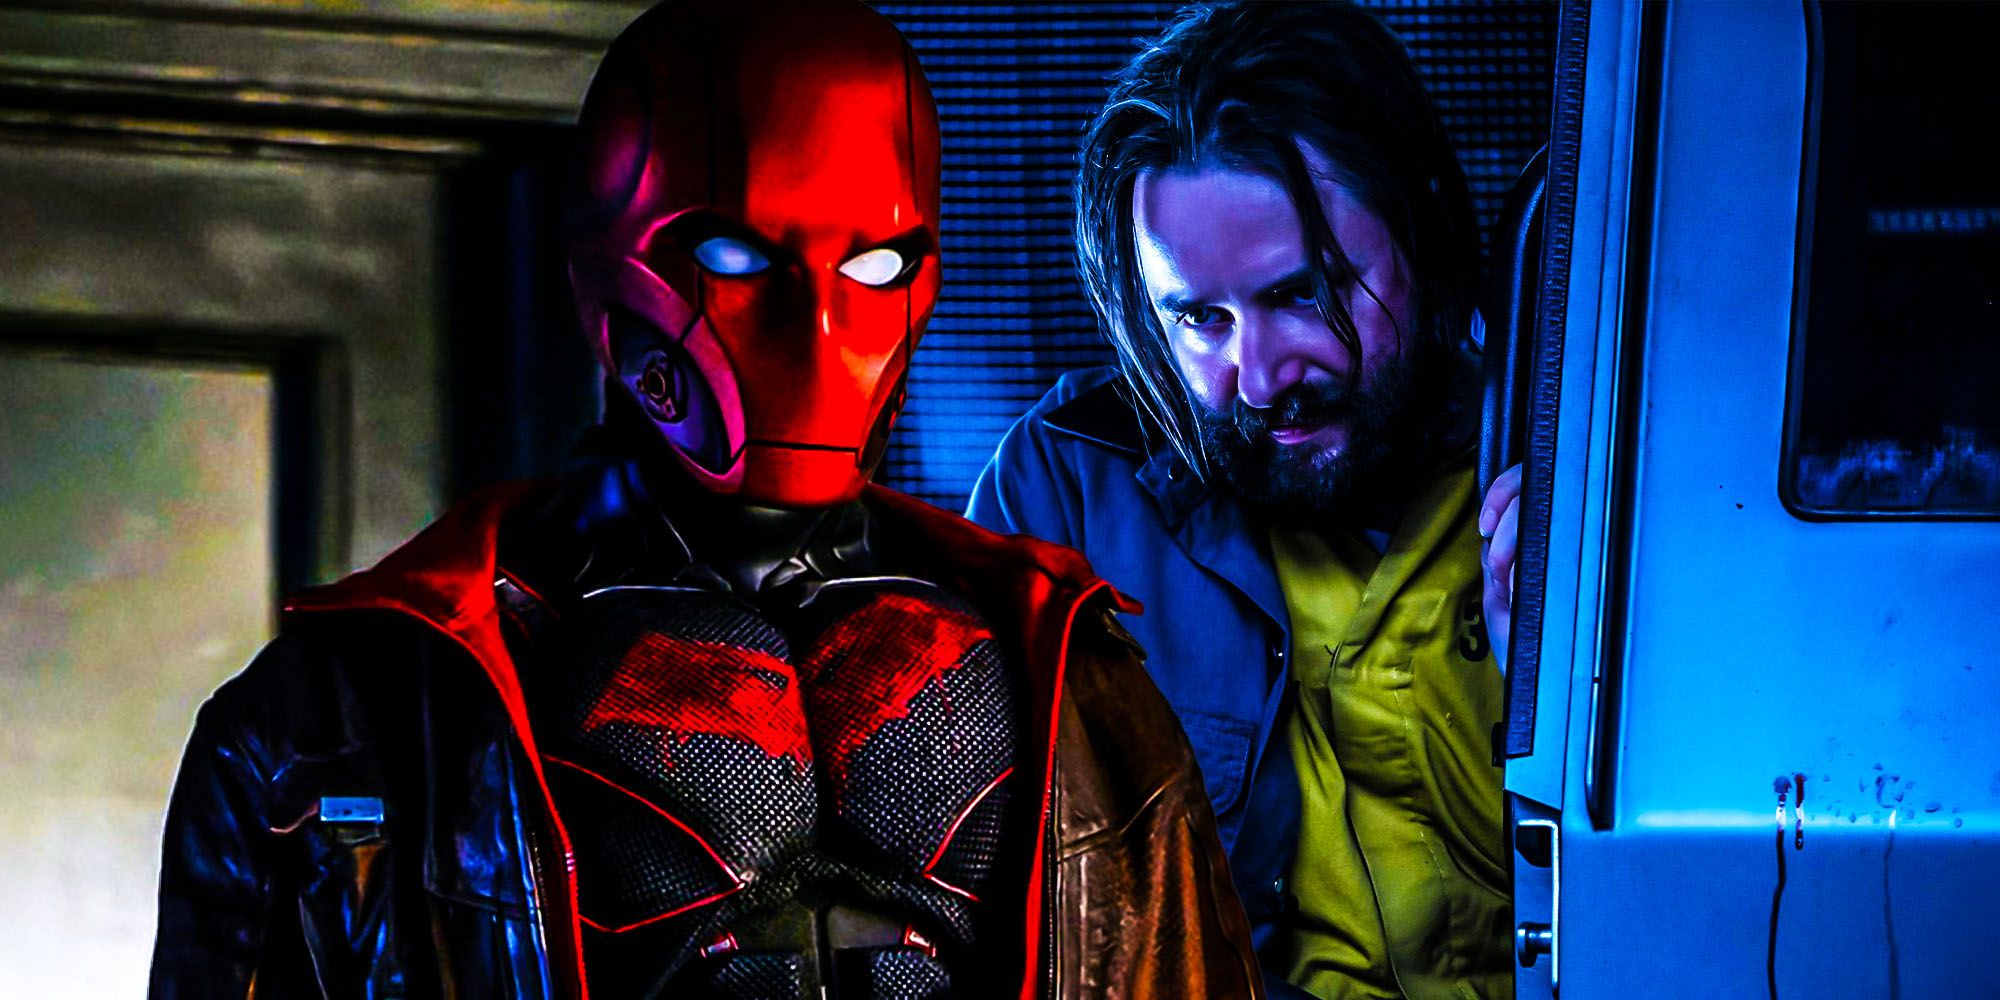 Blended image of Red Hood and Jonathan Crane in Titans